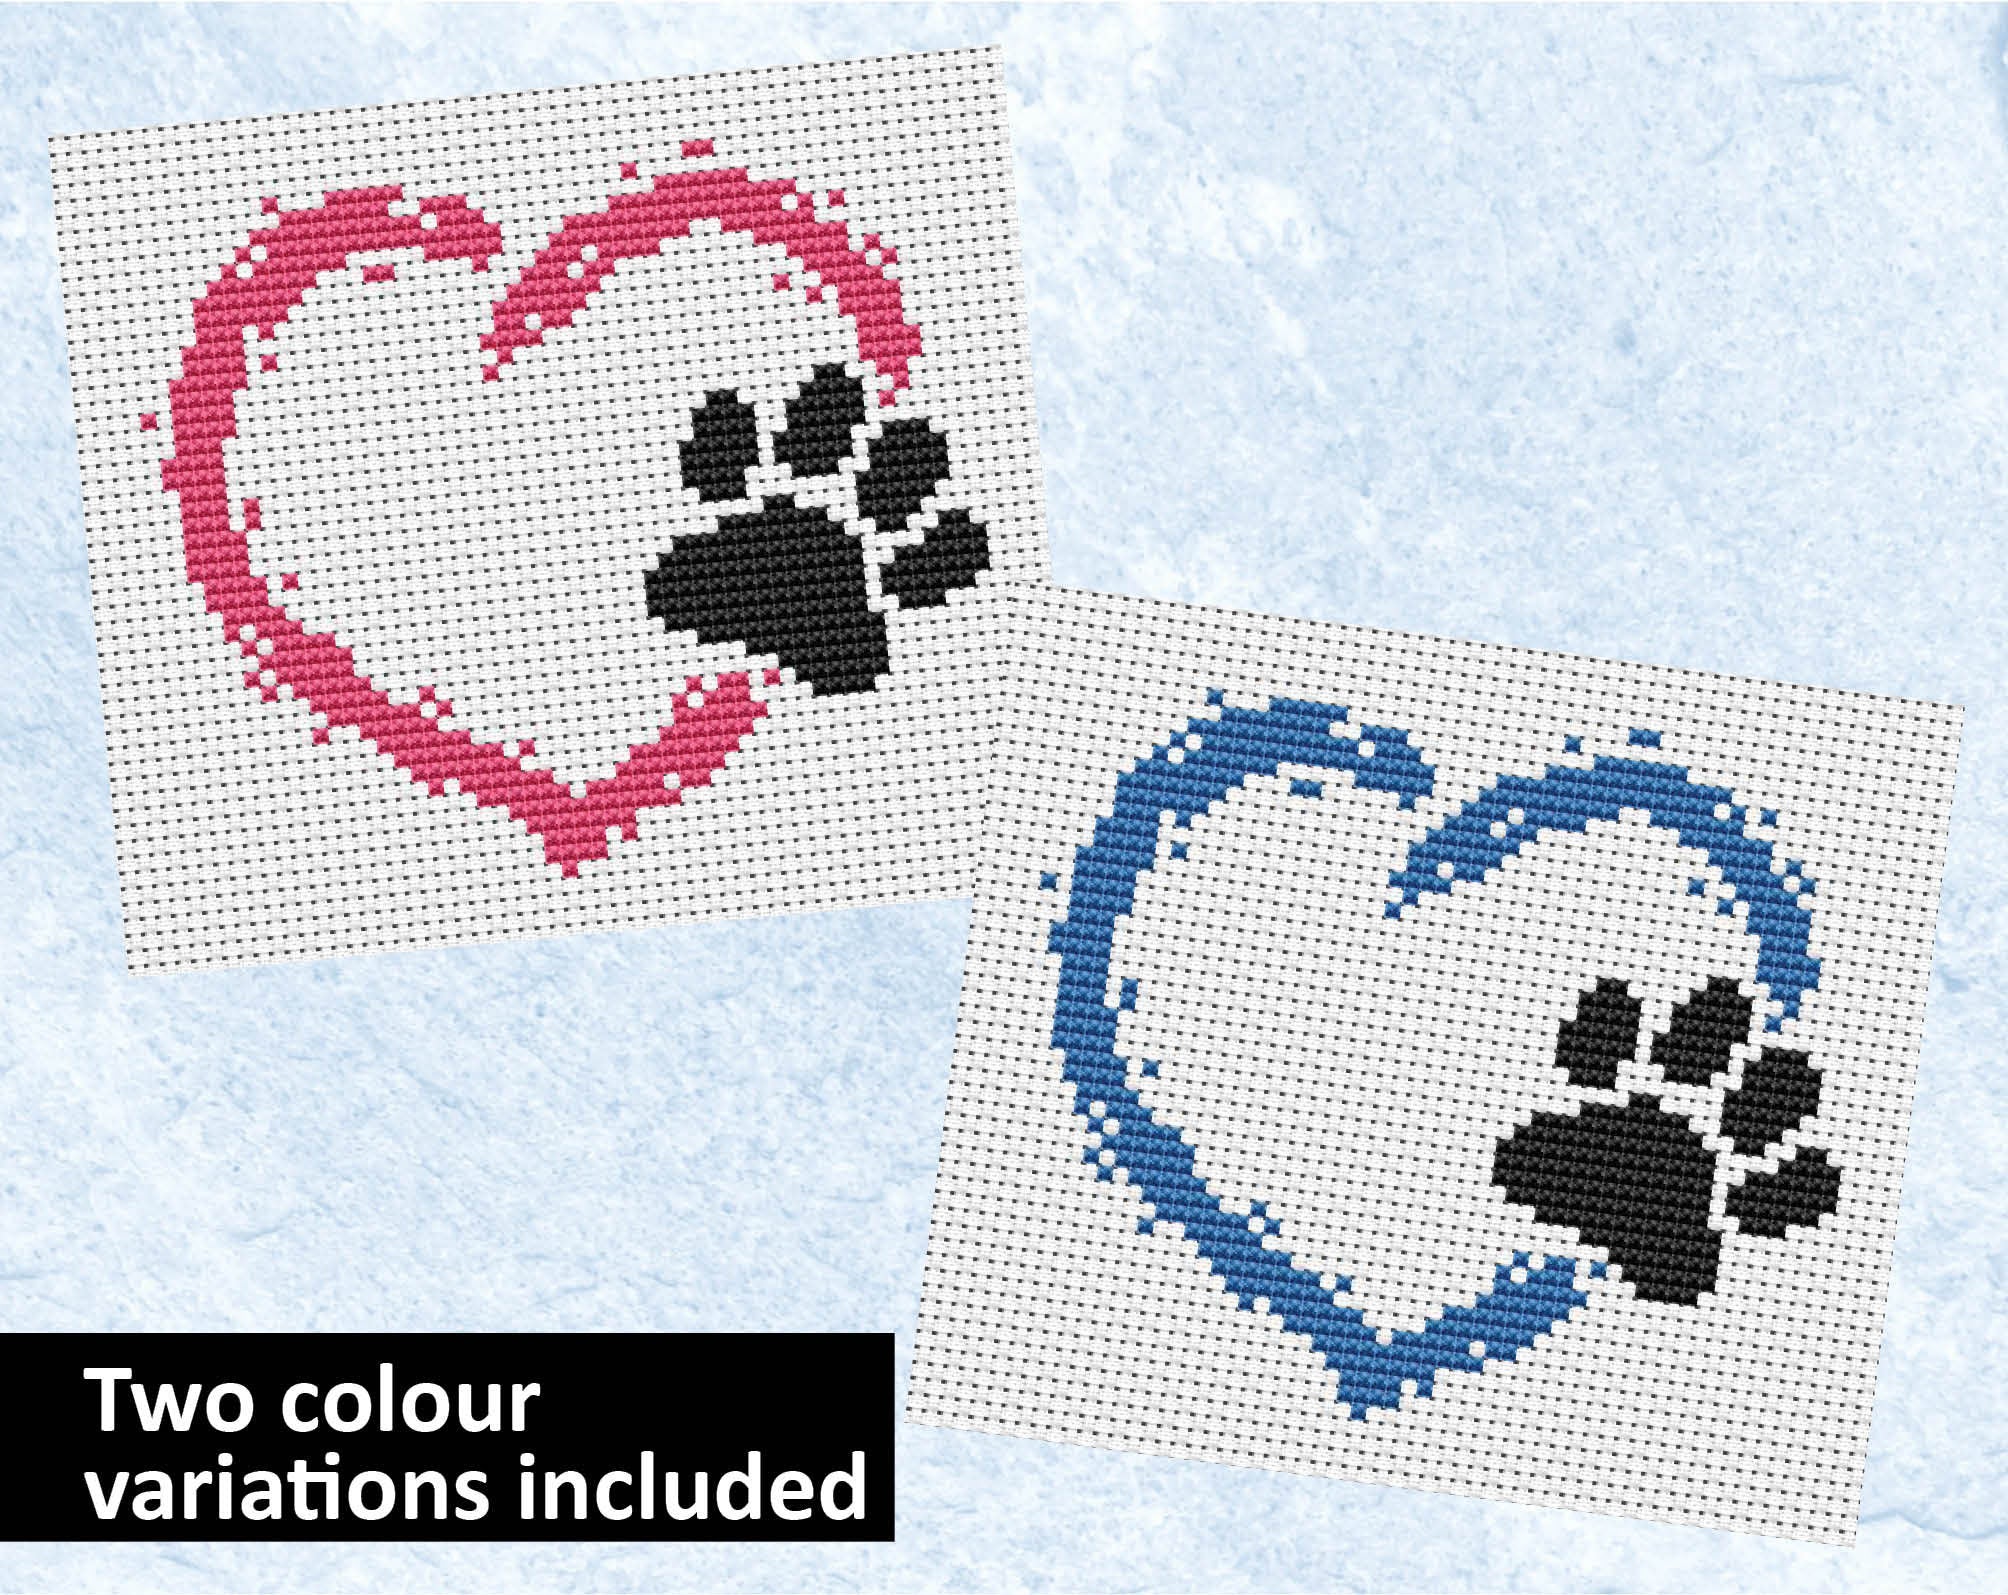 Paw Print On My Heart cross stitch pattern - pink and blue versions included